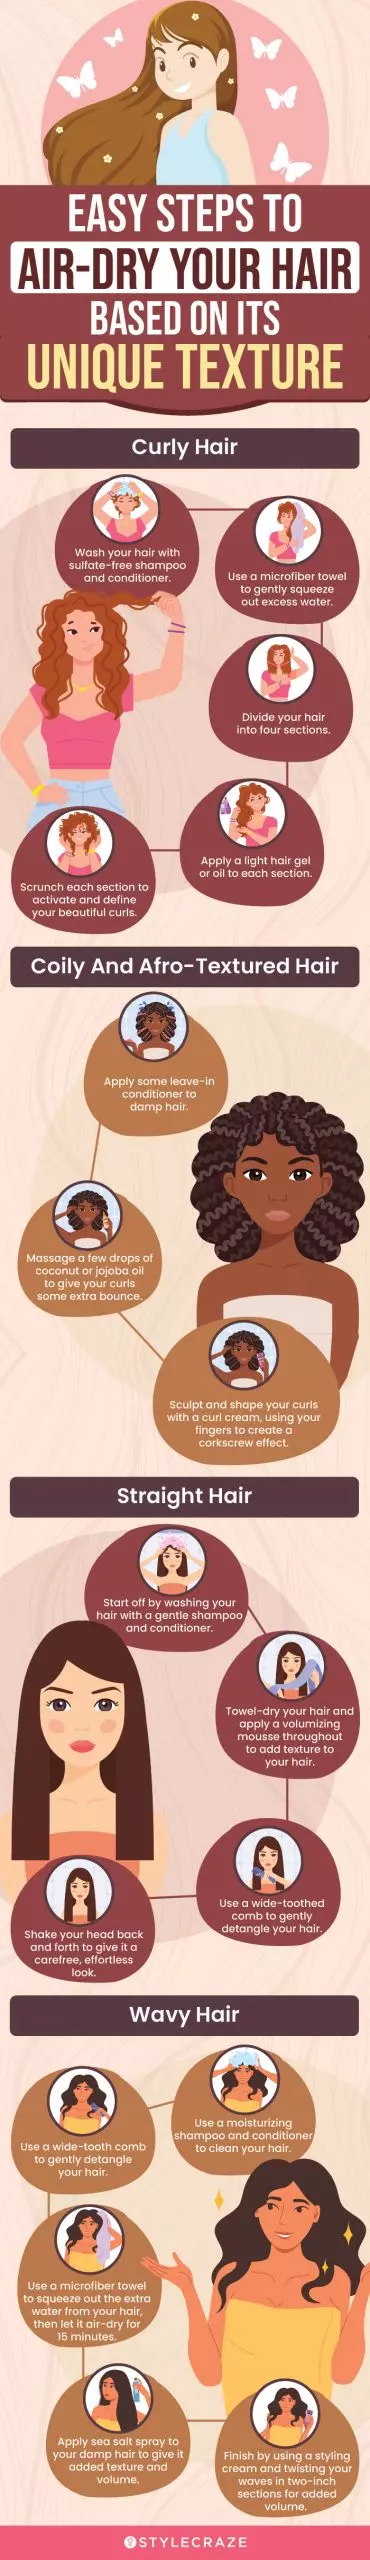 easy steps to air dry your hair based on its unique texture (infographic)